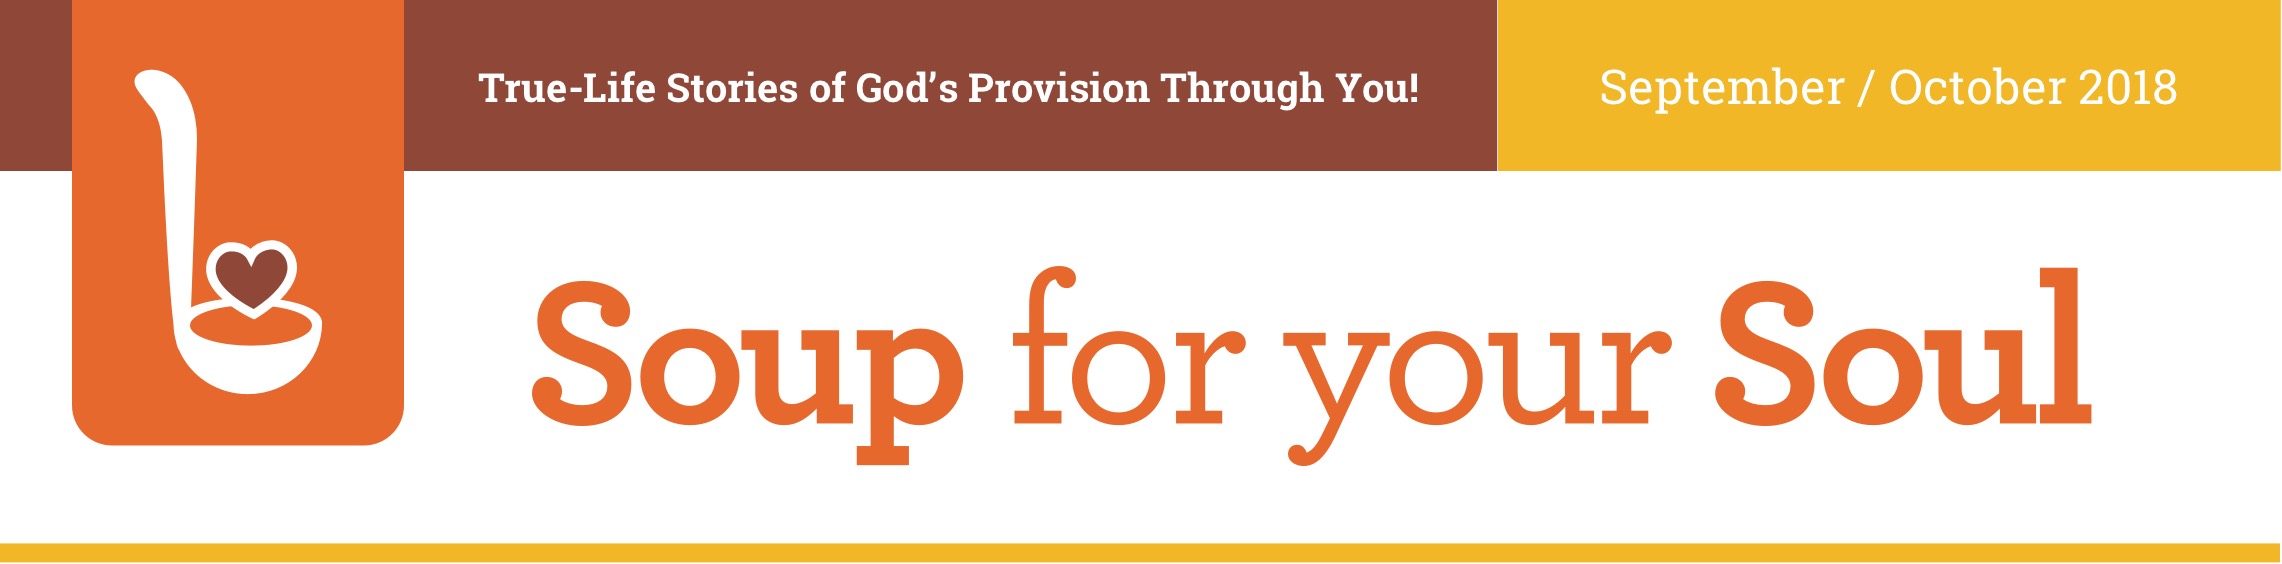 True-Life Stories of God’s Provision Through You! September/October 2018. Soup for your Soul